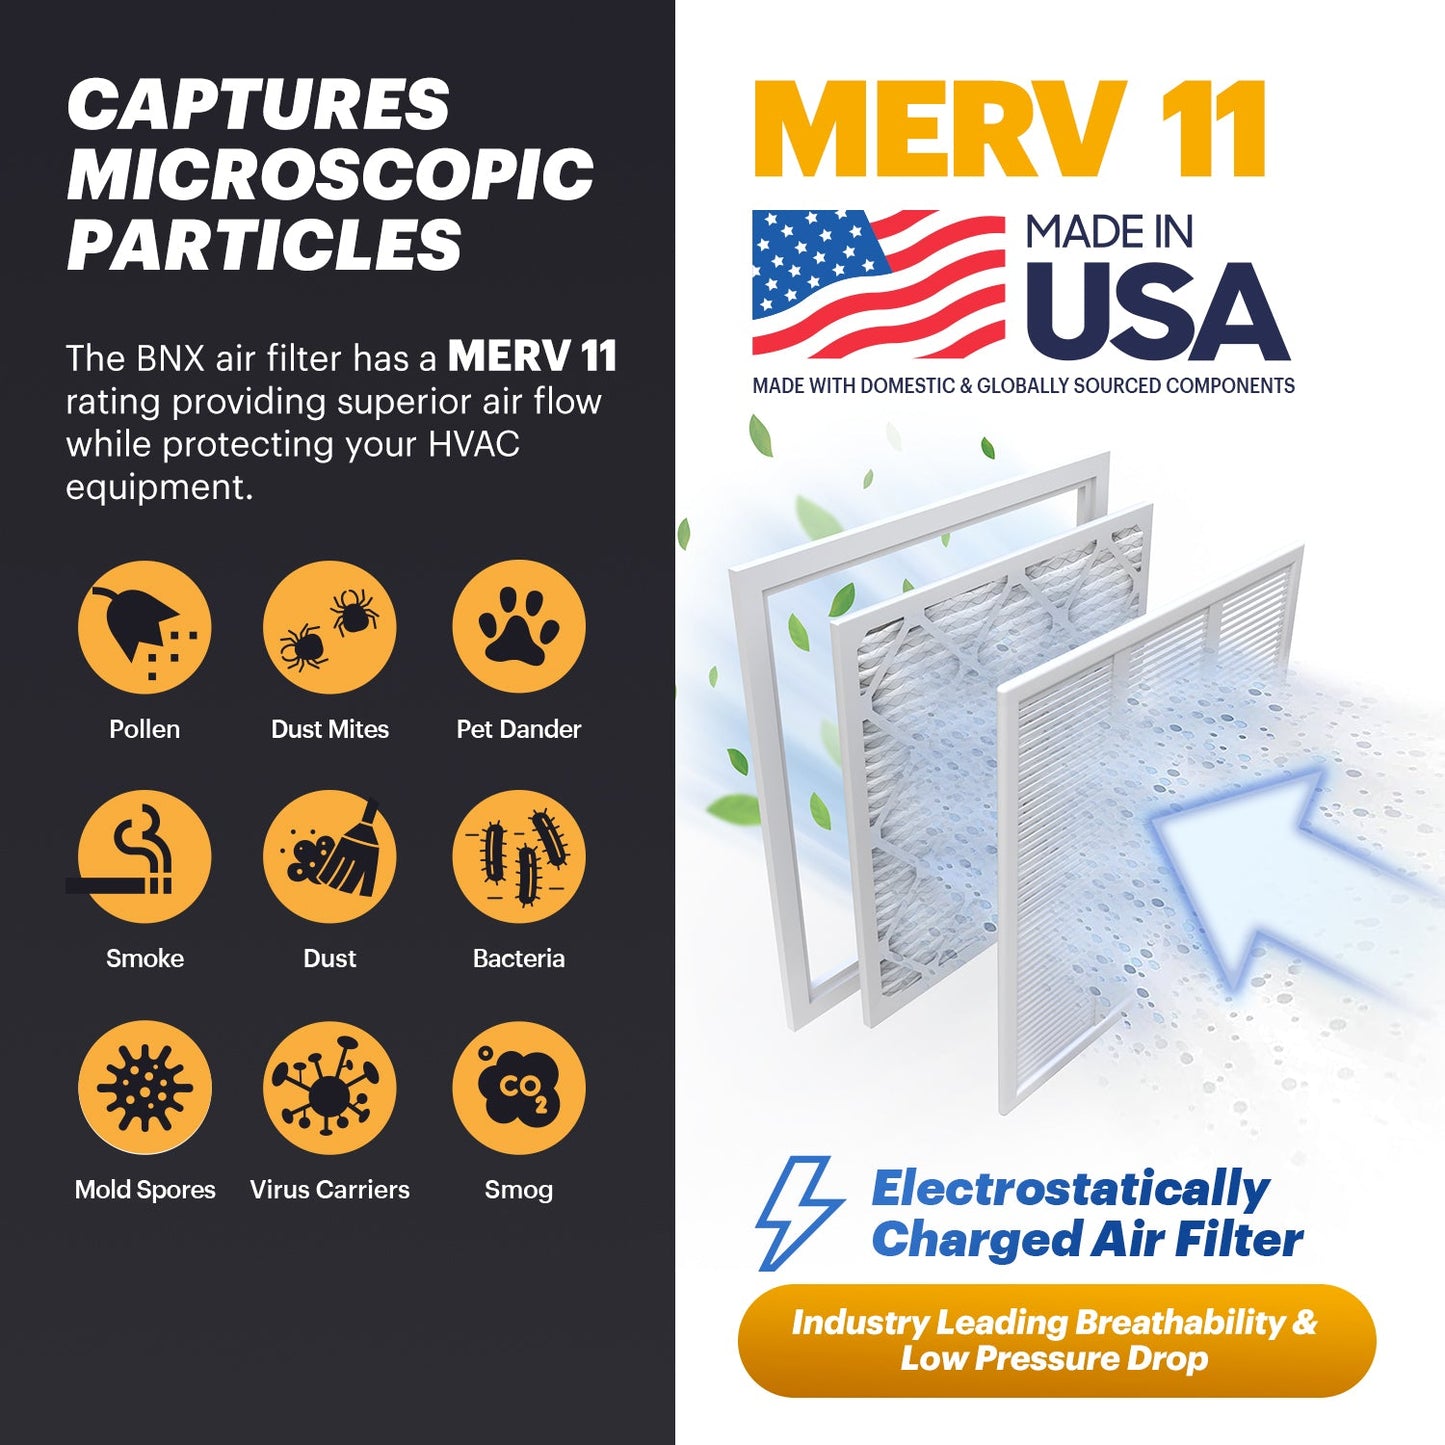 BNX 20x25x1 MERV 11 Air Filter 10 Pack - MADE IN USA - Electrostatic Pleated Air Conditioner HVAC AC Furnace Filters - Removes Dust, Mold, Pollen, Lint, Pet Dander, Smoke, Smog